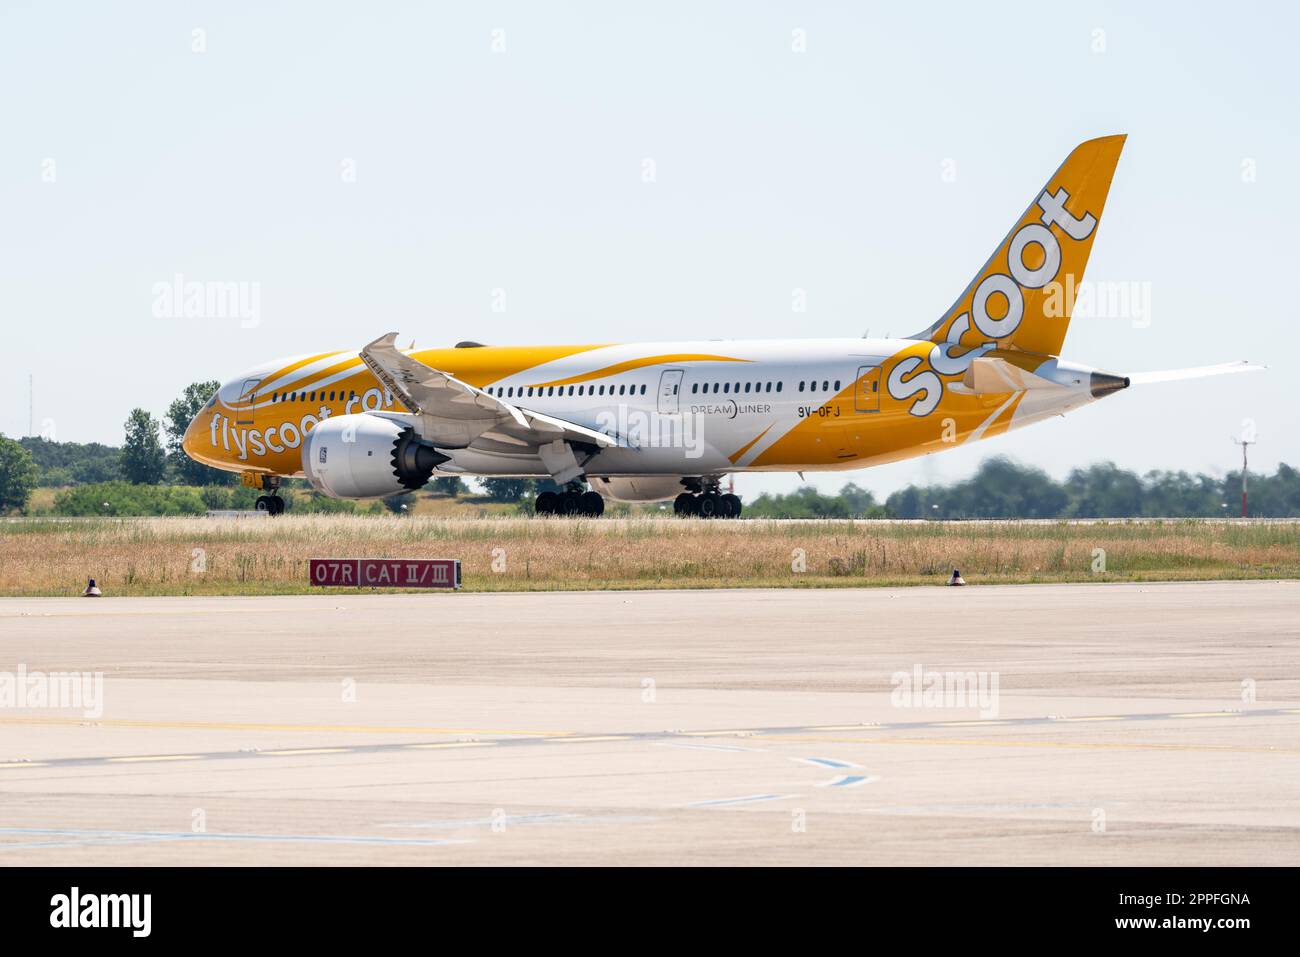 BERLIN, GERMANY - JUNE 23, 2022: Wide-body jet airliner Boeing 787-8 Dreamliner of Scoot airline. Stock Photo